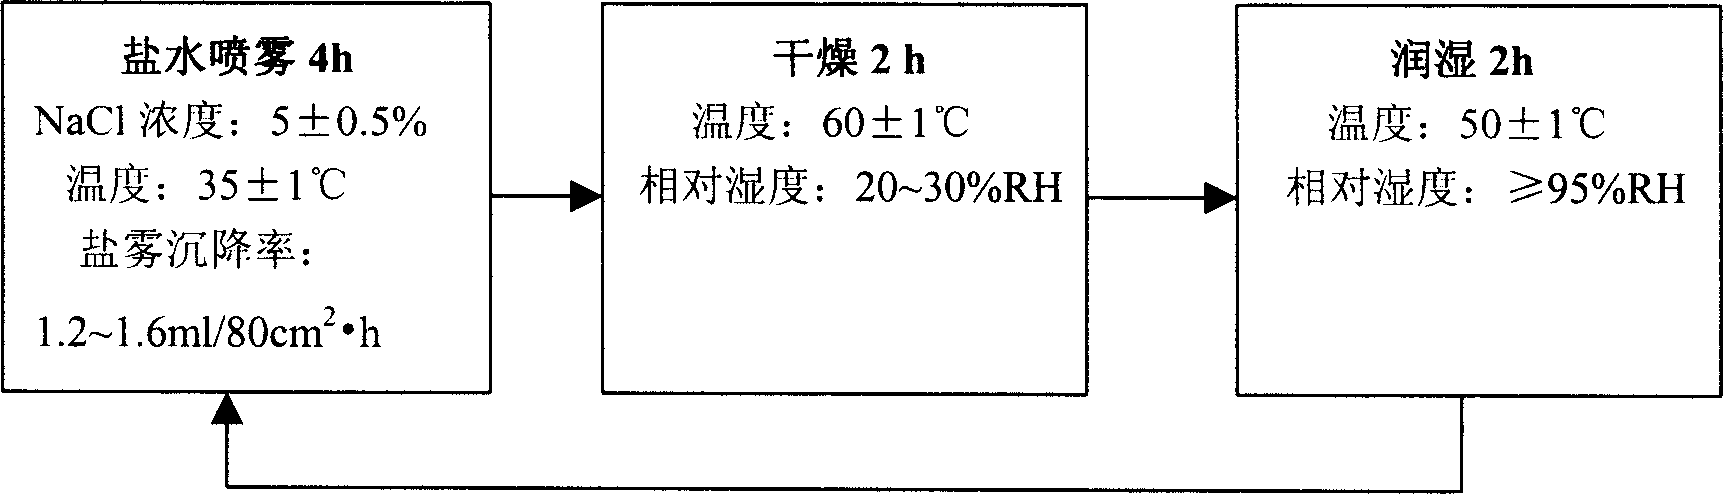 Sea water corrosion resistant steel for ocean drilling/production platform and preparation method thereof